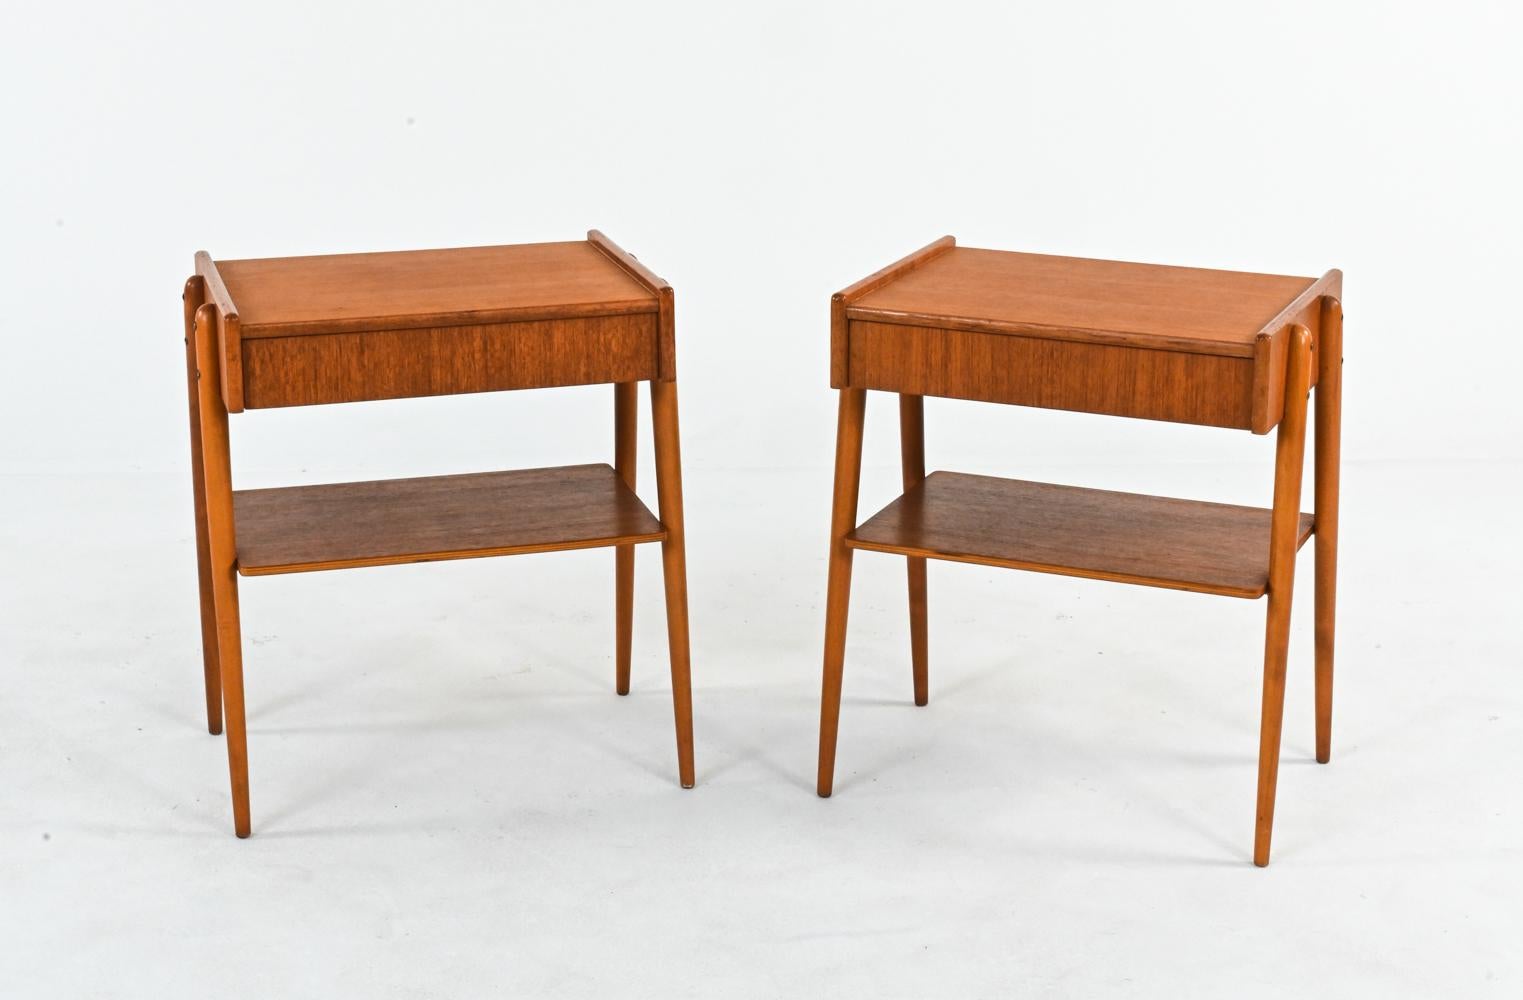 Perfectly proportioned for a small space, this pair of bedside tables by Carlstrom & Co. features warm teak veneers and a classic Mid-Century Modern look. The design consists of a single drawer and shelf suspended between splayed legs, evoking a